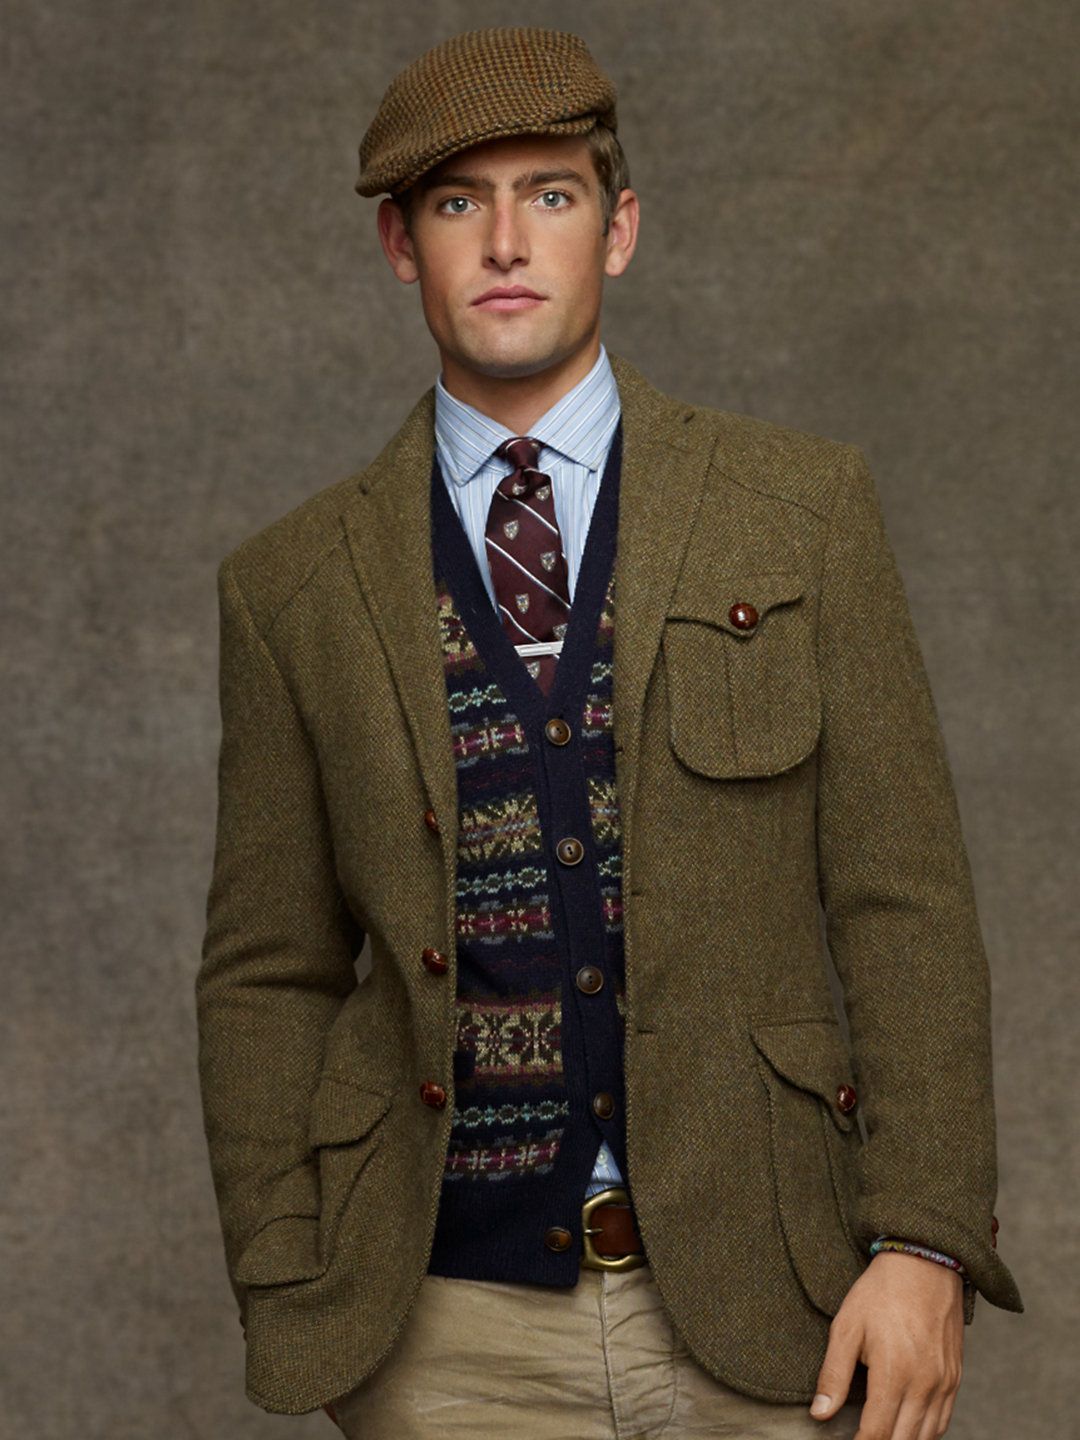 Tweed Jacket Men Topping The Tops Of
  Style And Grace